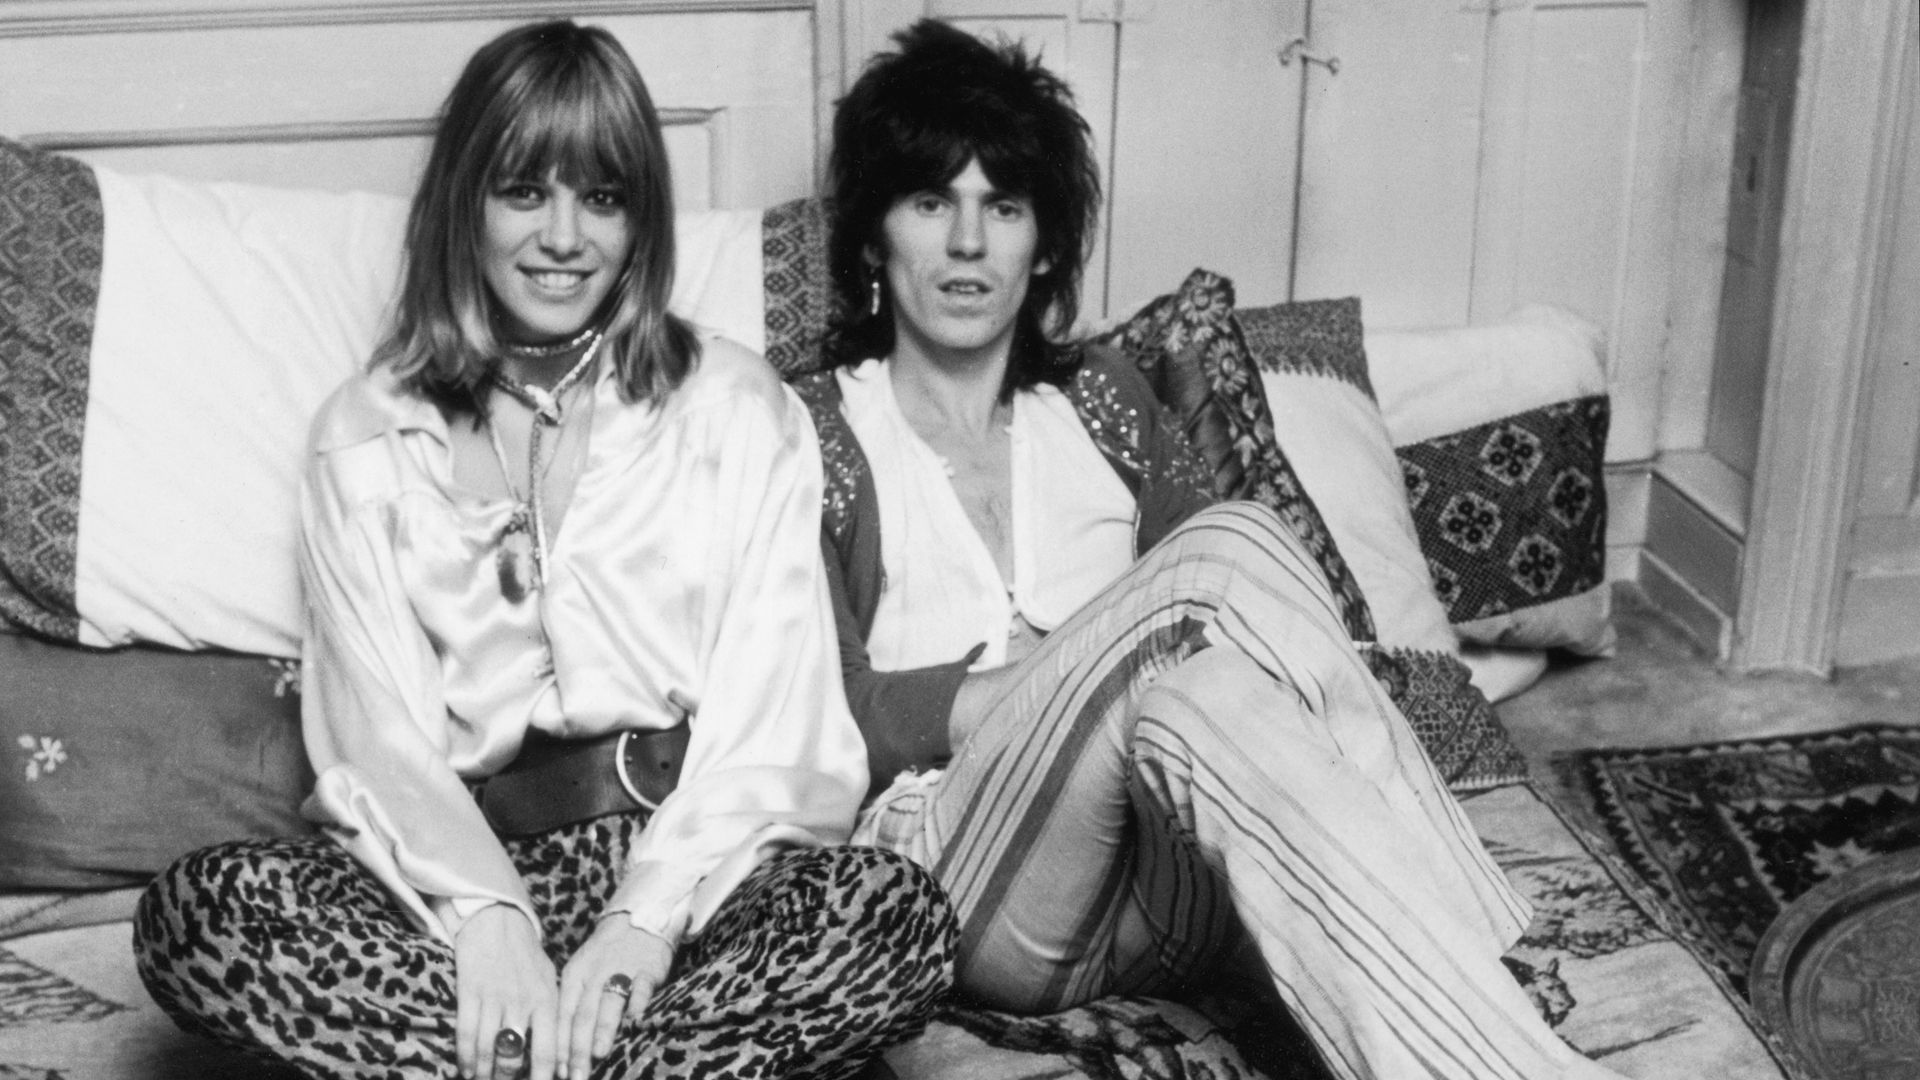 Rolling Stone Keith Richards and his girlfriend Anita Pallenberg, 9th December 1969. (Photo by McCarthy/Daily Express/Hulton Archive/Getty Images)